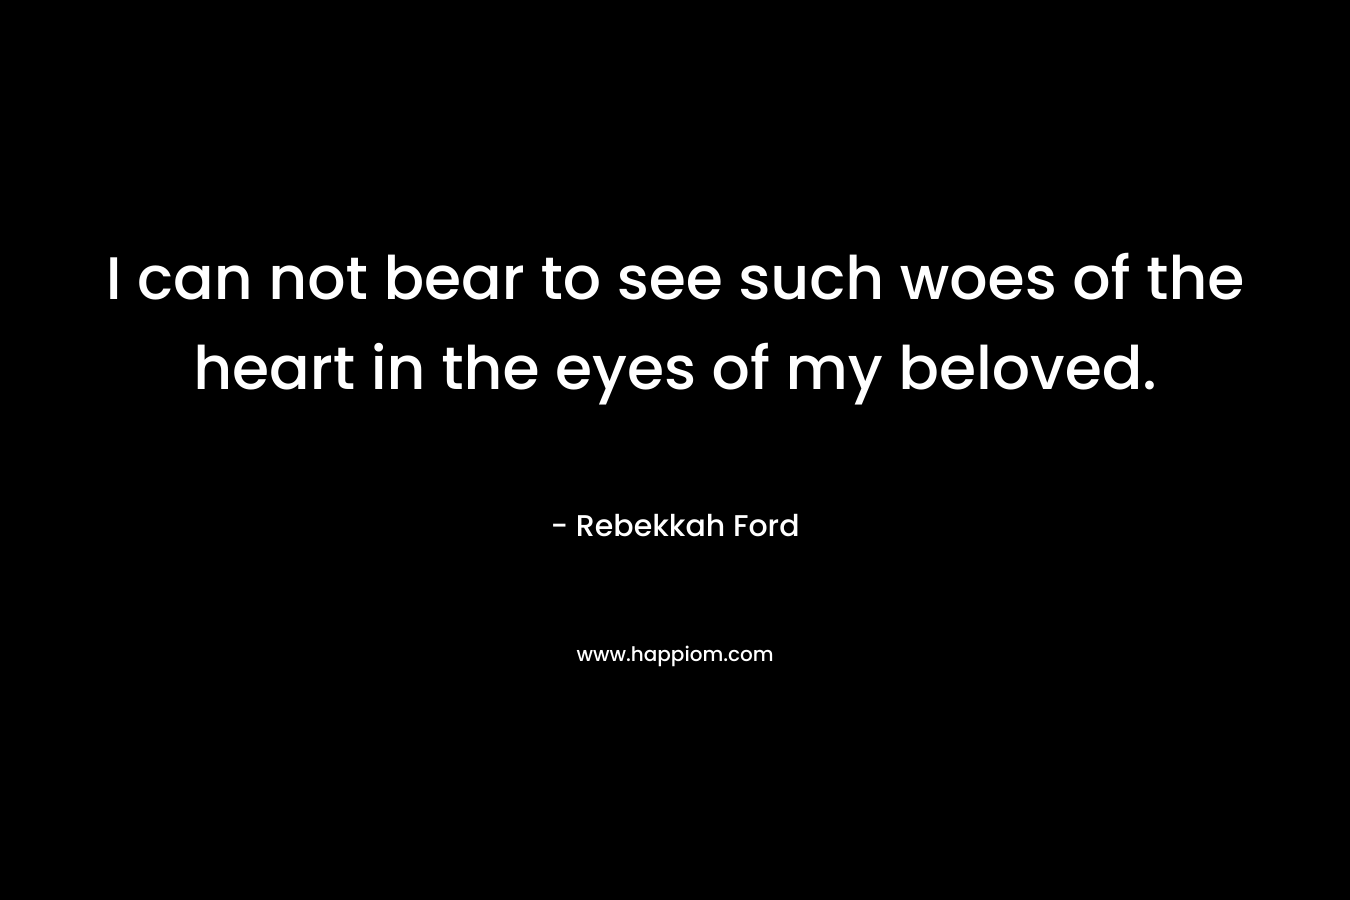 I can not bear to see such woes of the heart in the eyes of my beloved. – Rebekkah Ford